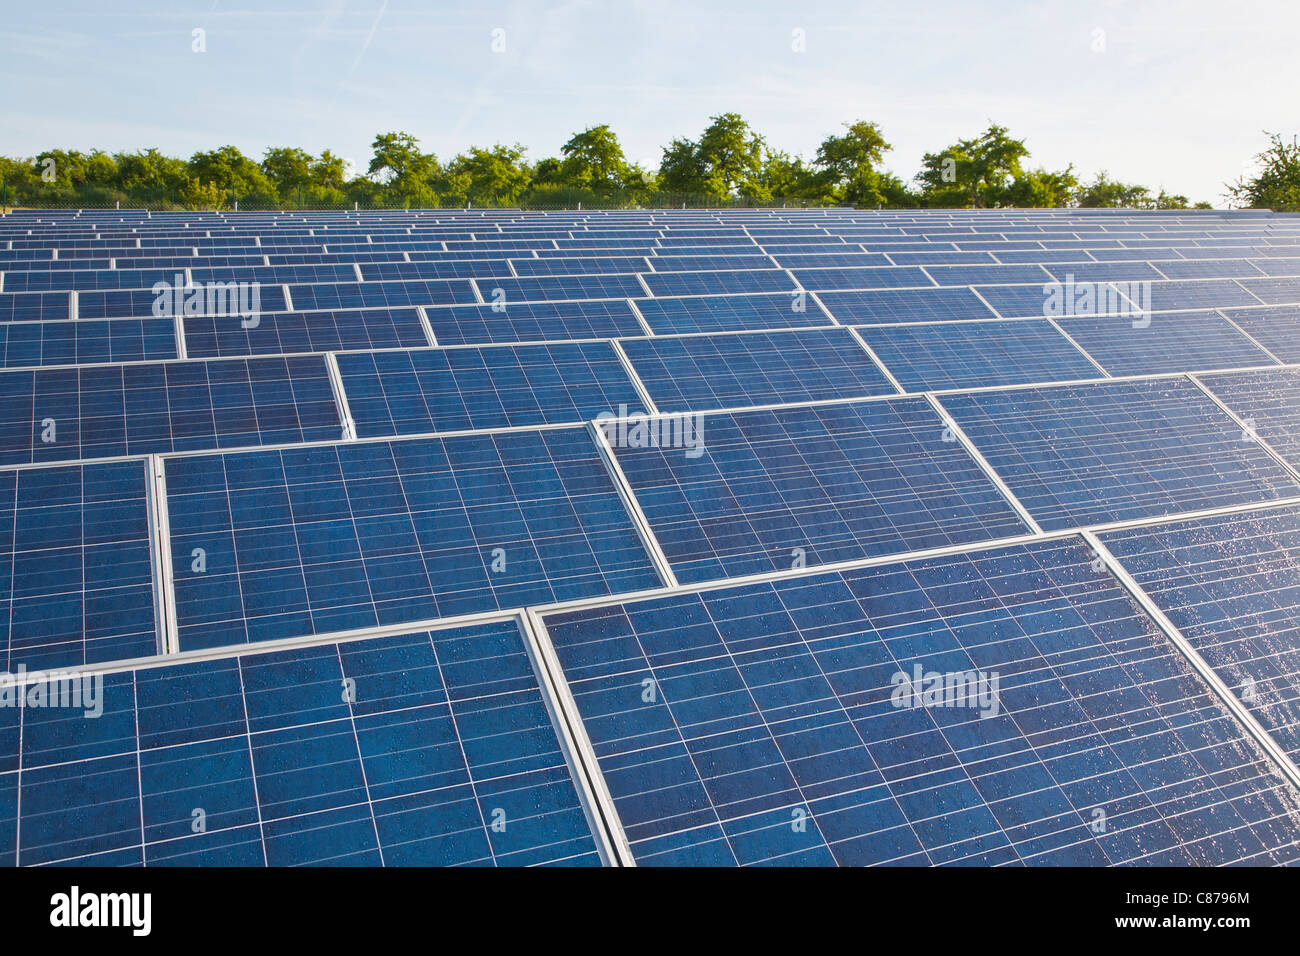 Germany, Baden-Wurttemberg, Winnenden, View of large number of solar panels at solar power plant field Stock Photo